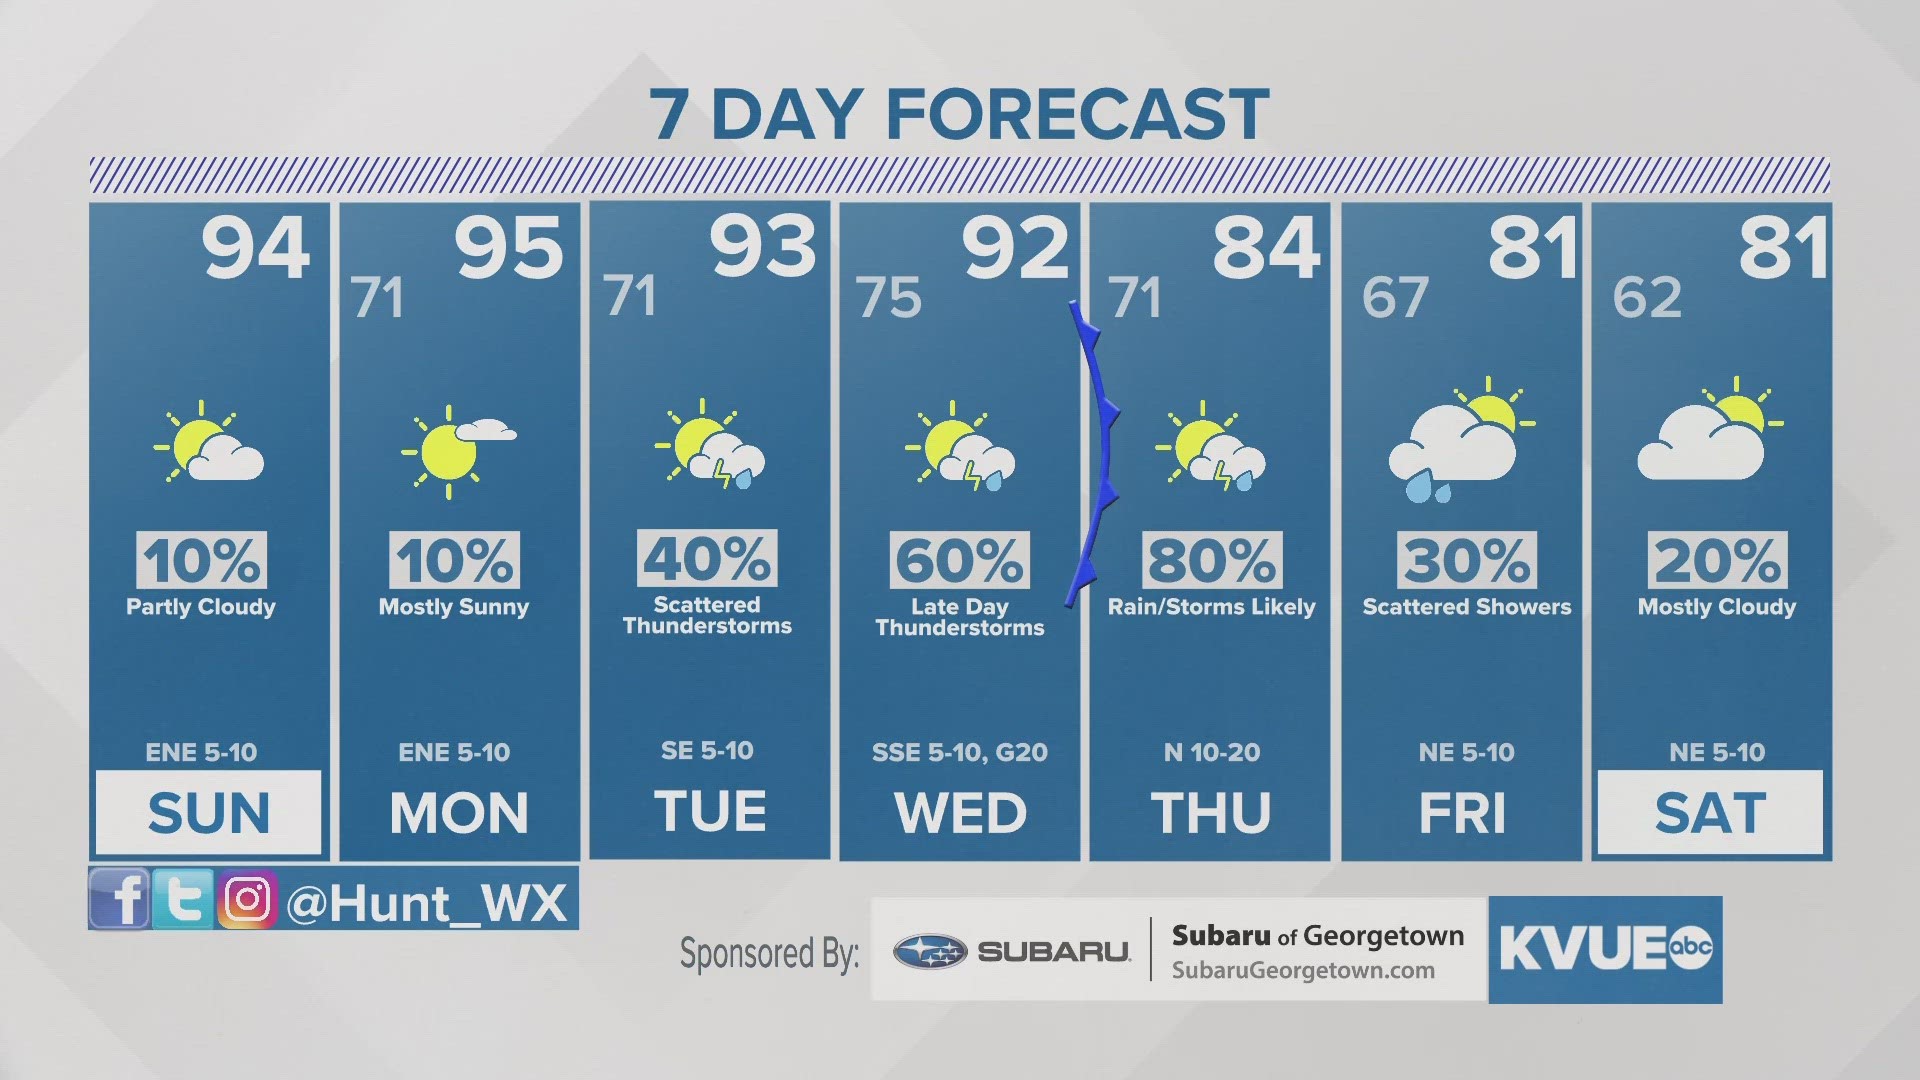 Cold front brings heat relief and rain for the upcoming week.